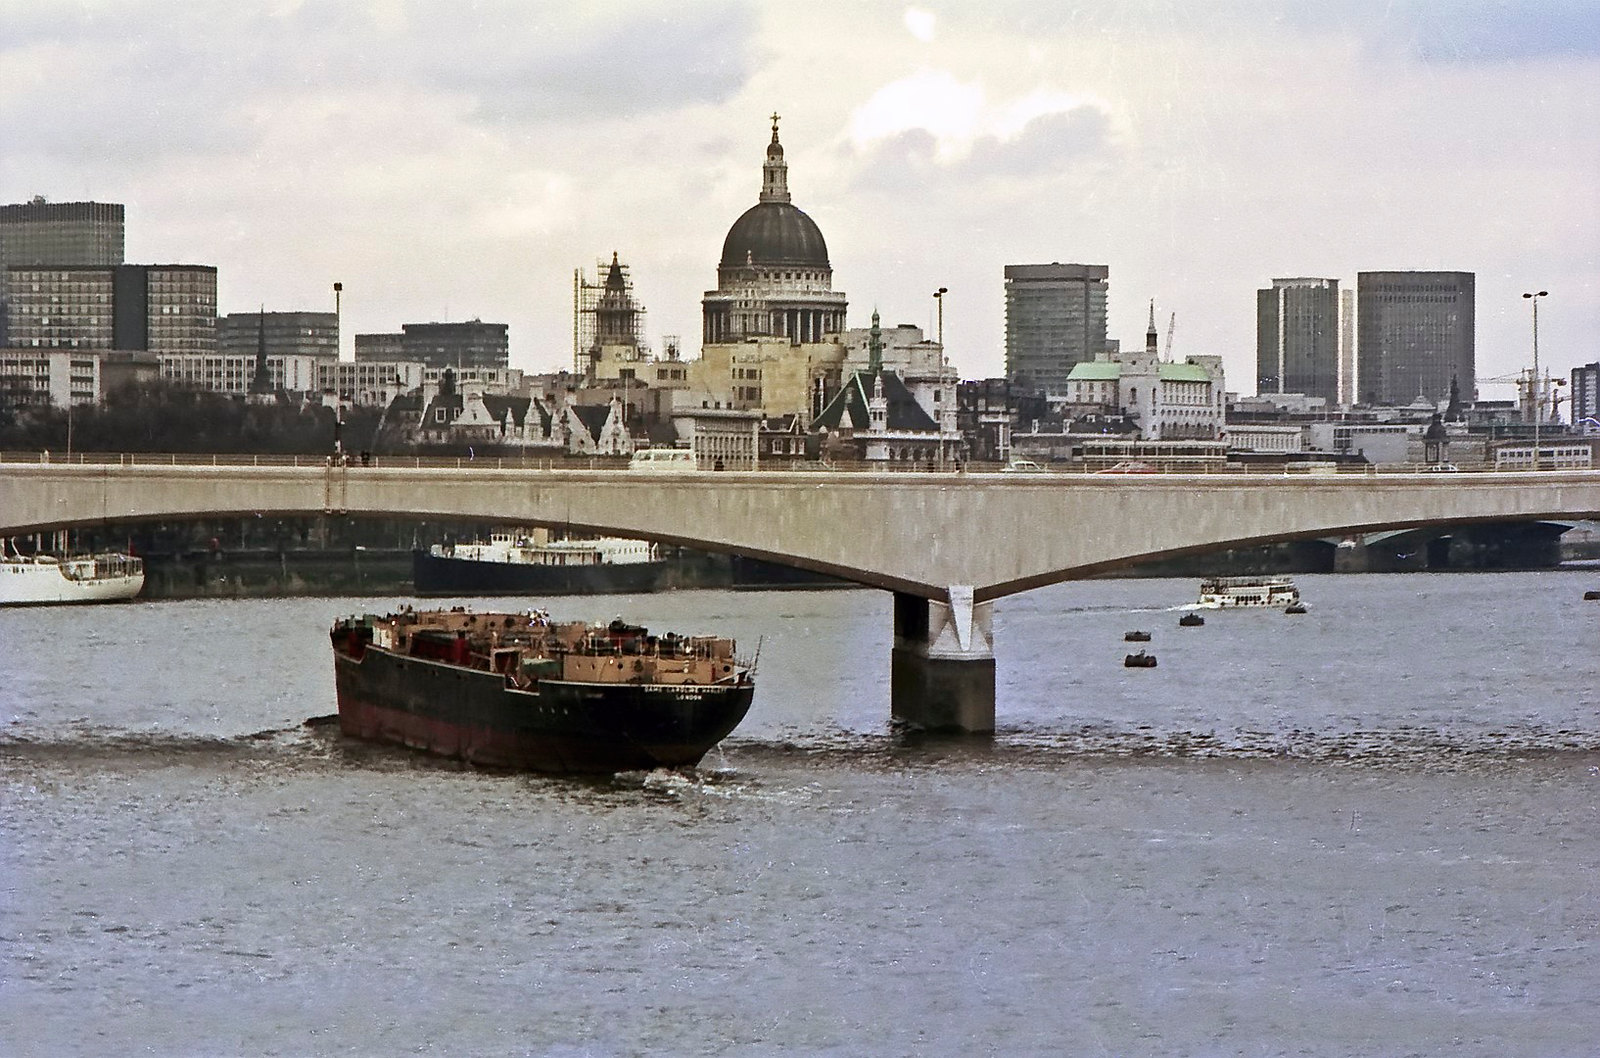 A barge passes beneath Waterloo Bridge with St. Paul's cathedral in the background. 19th April 1975.